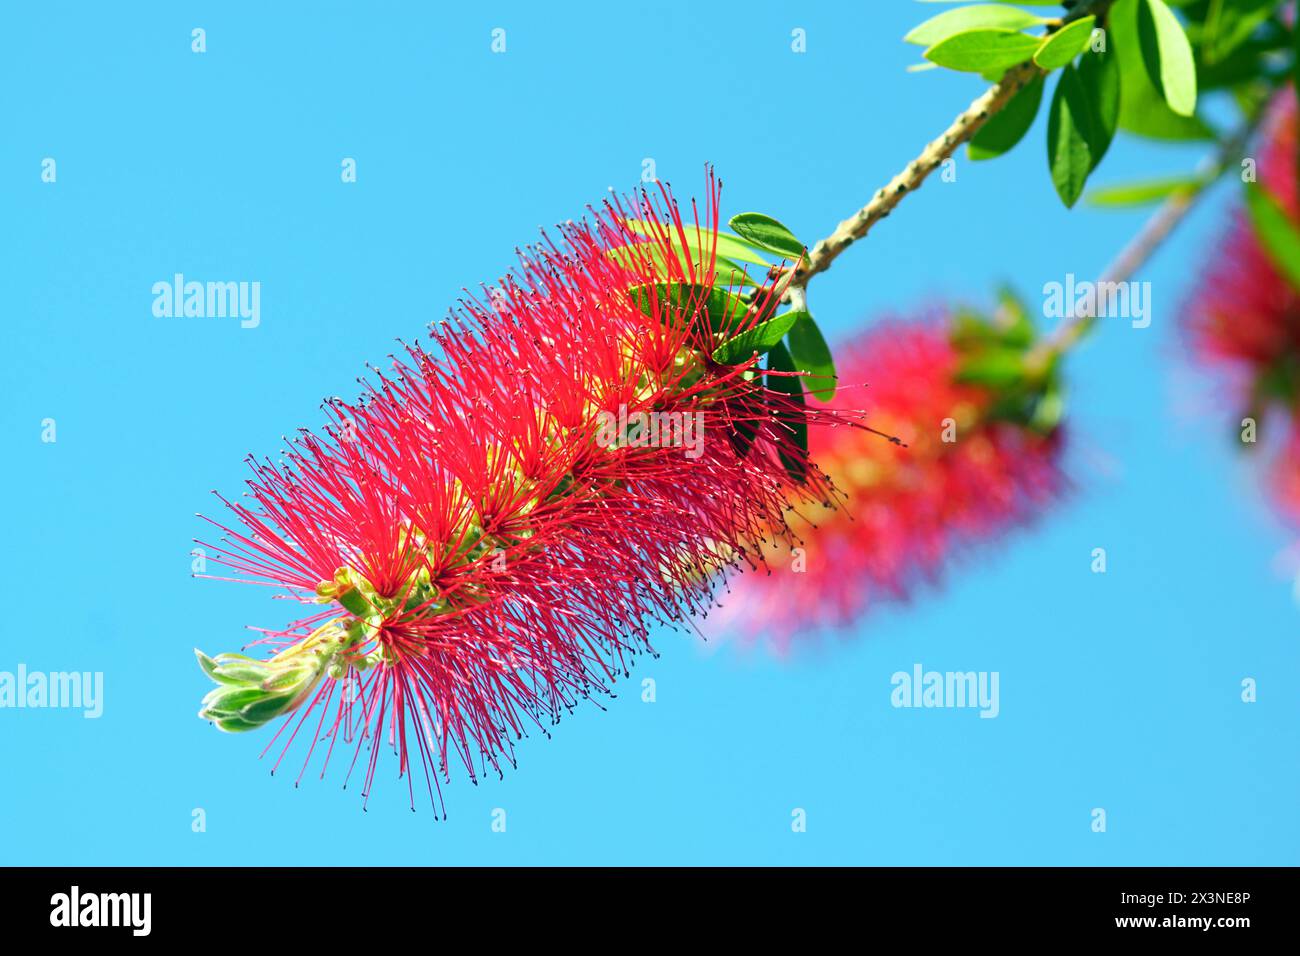 A pair of bright red flowers against a blue sky - close-up of a callistemon bush during flowering Stock Photo